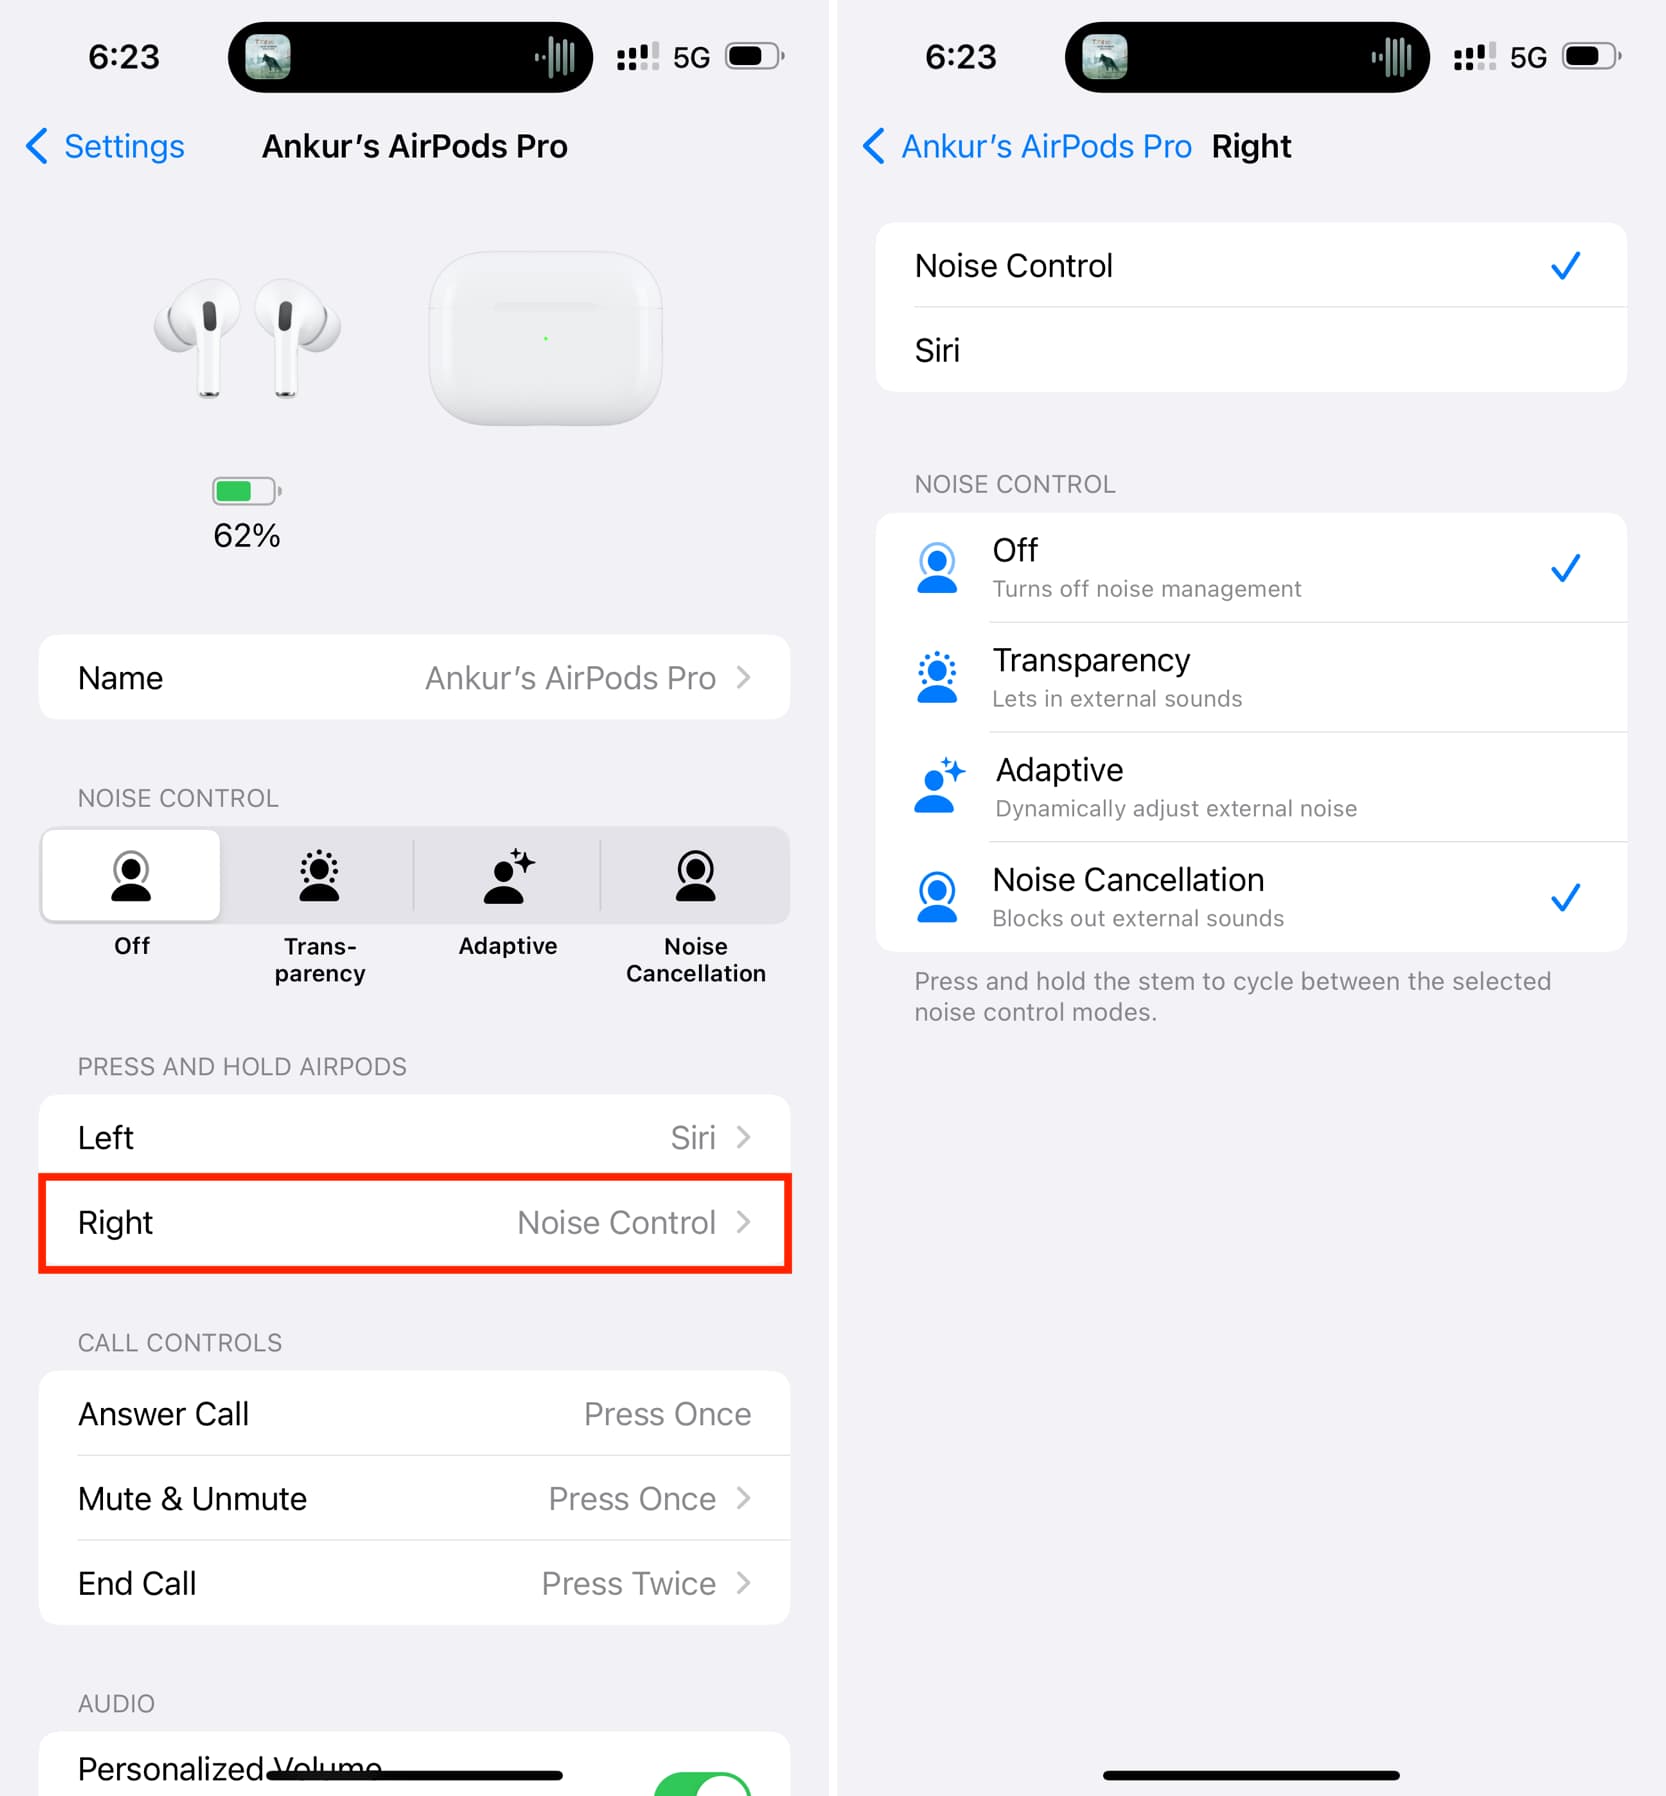 Cycle between various Noise Control modes for AirPods Pro